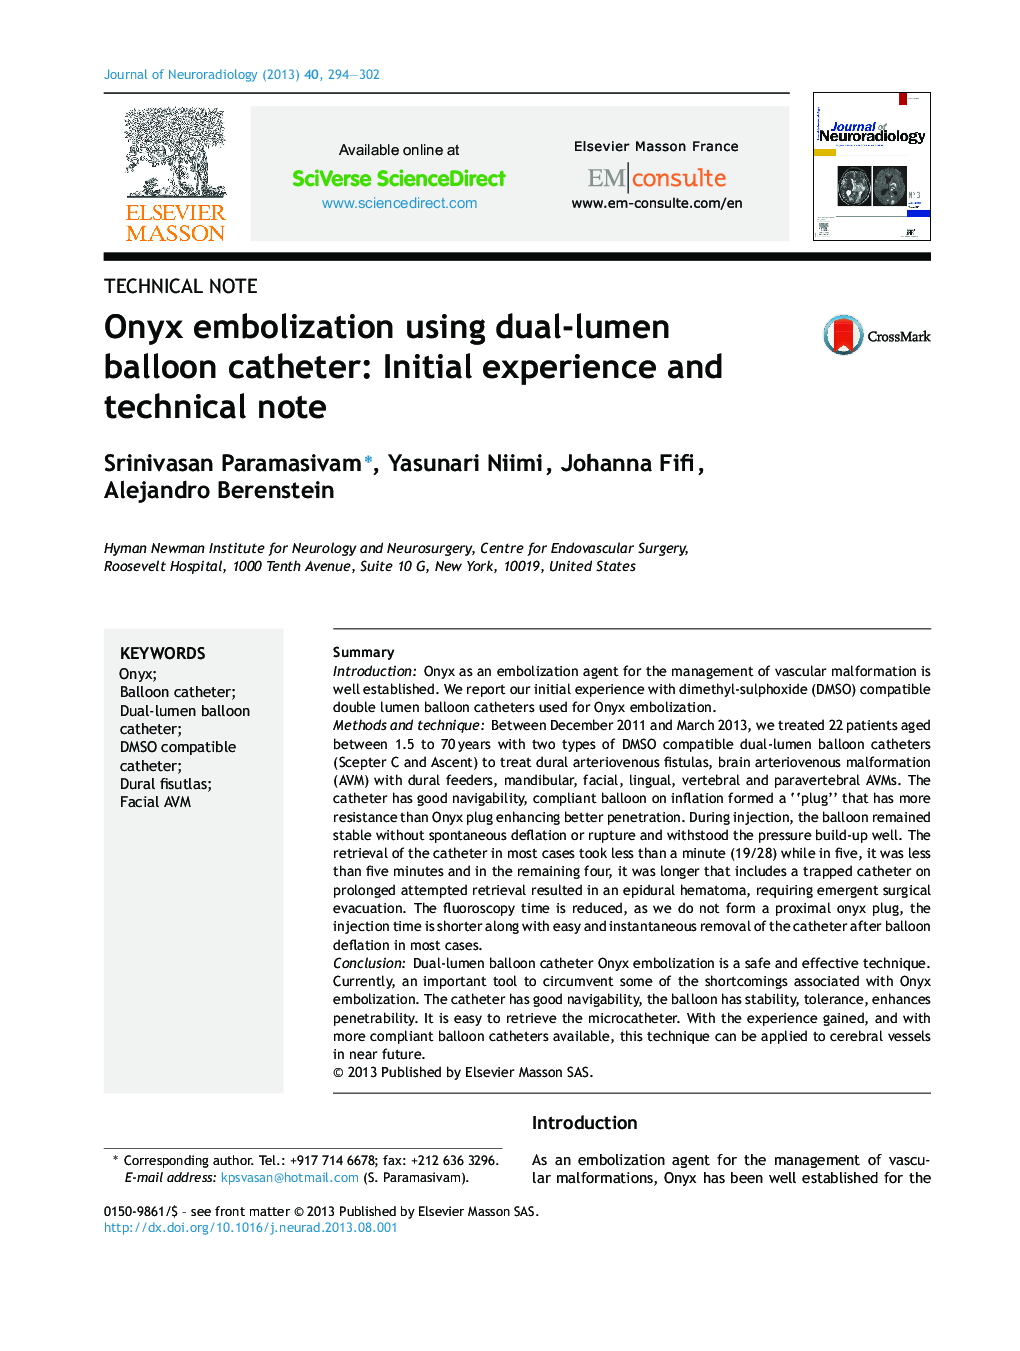 Onyx embolization using dual-lumen balloon catheter: Initial experience and technical note